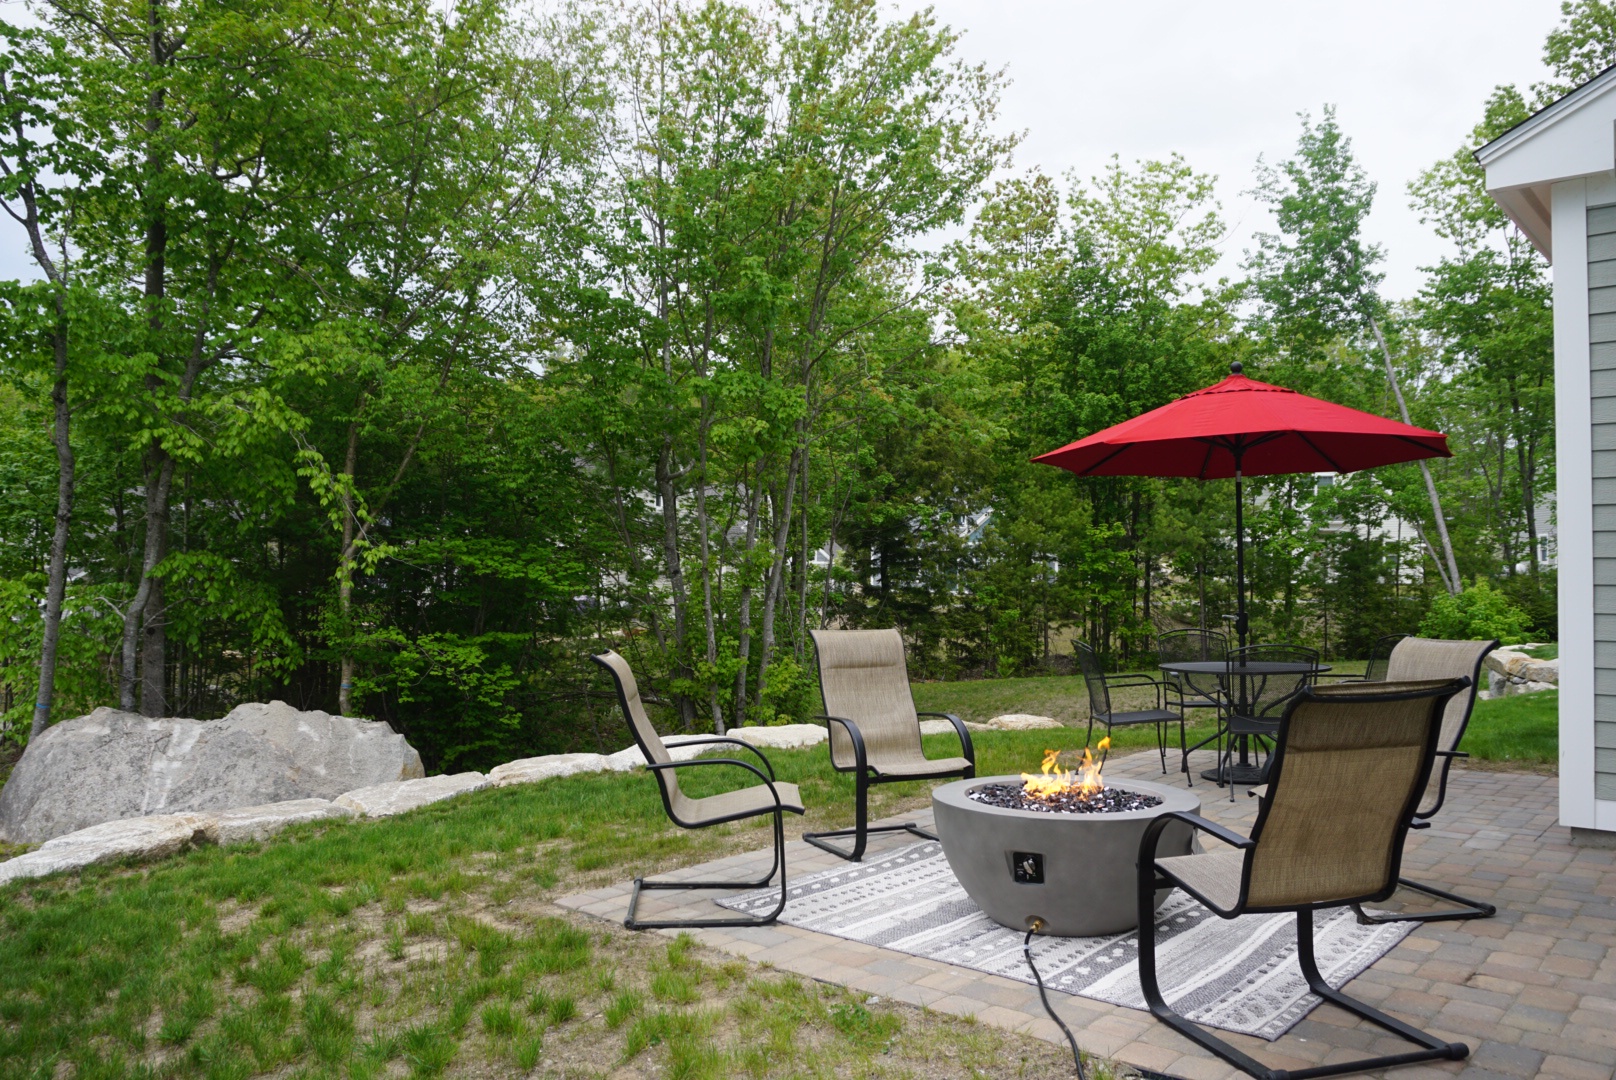 Lounge the day away by the private firepit or dine alfresco on the patio